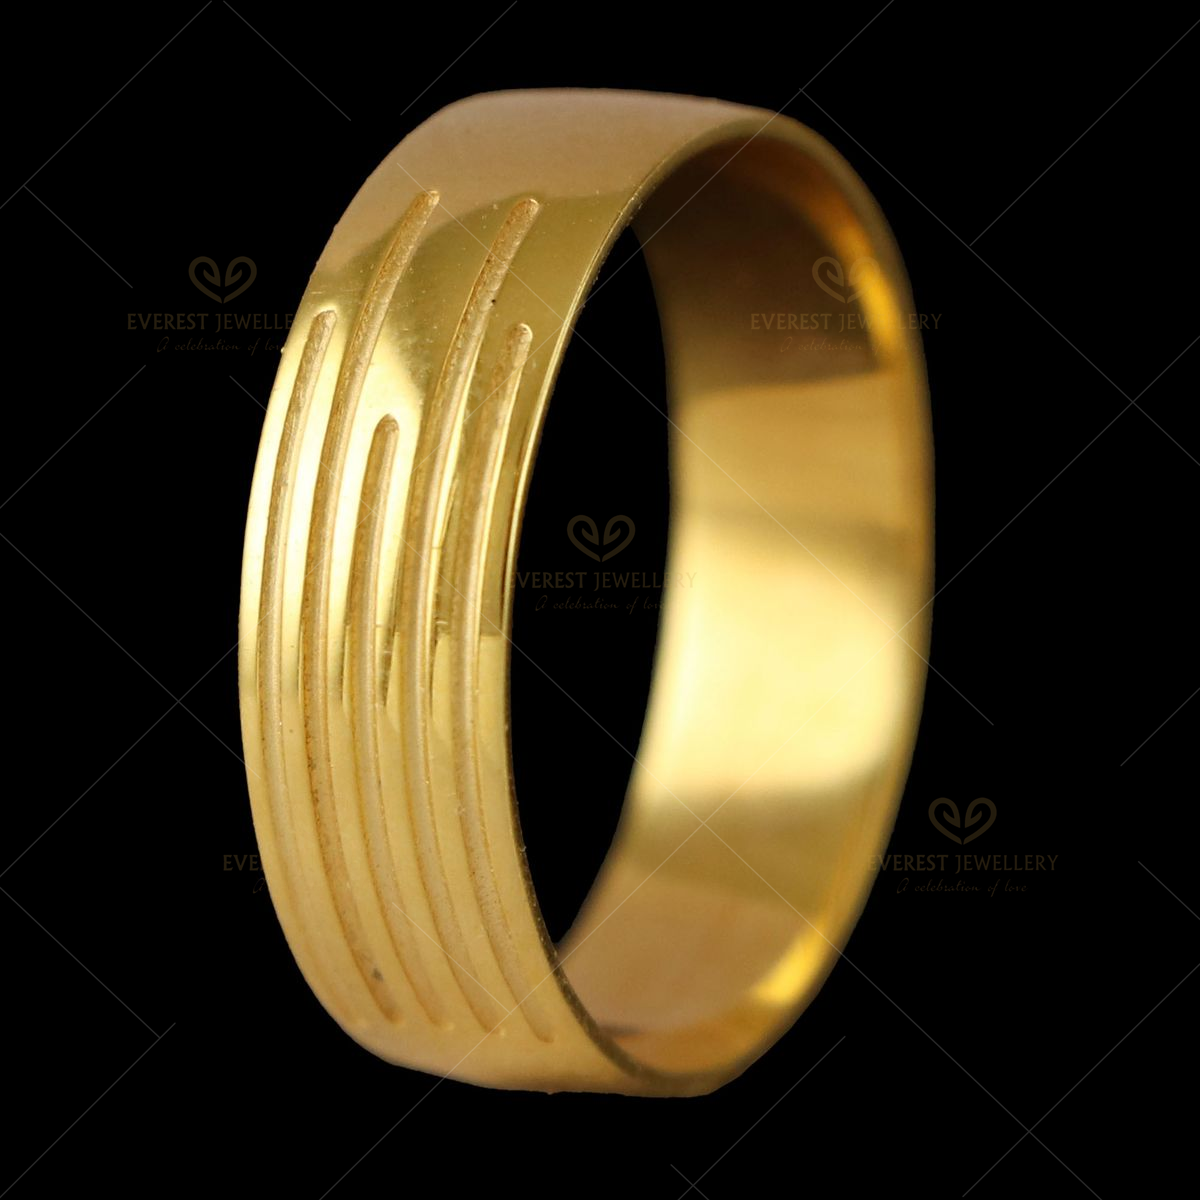 Buy quality jewelry for Gents online in Chennai.